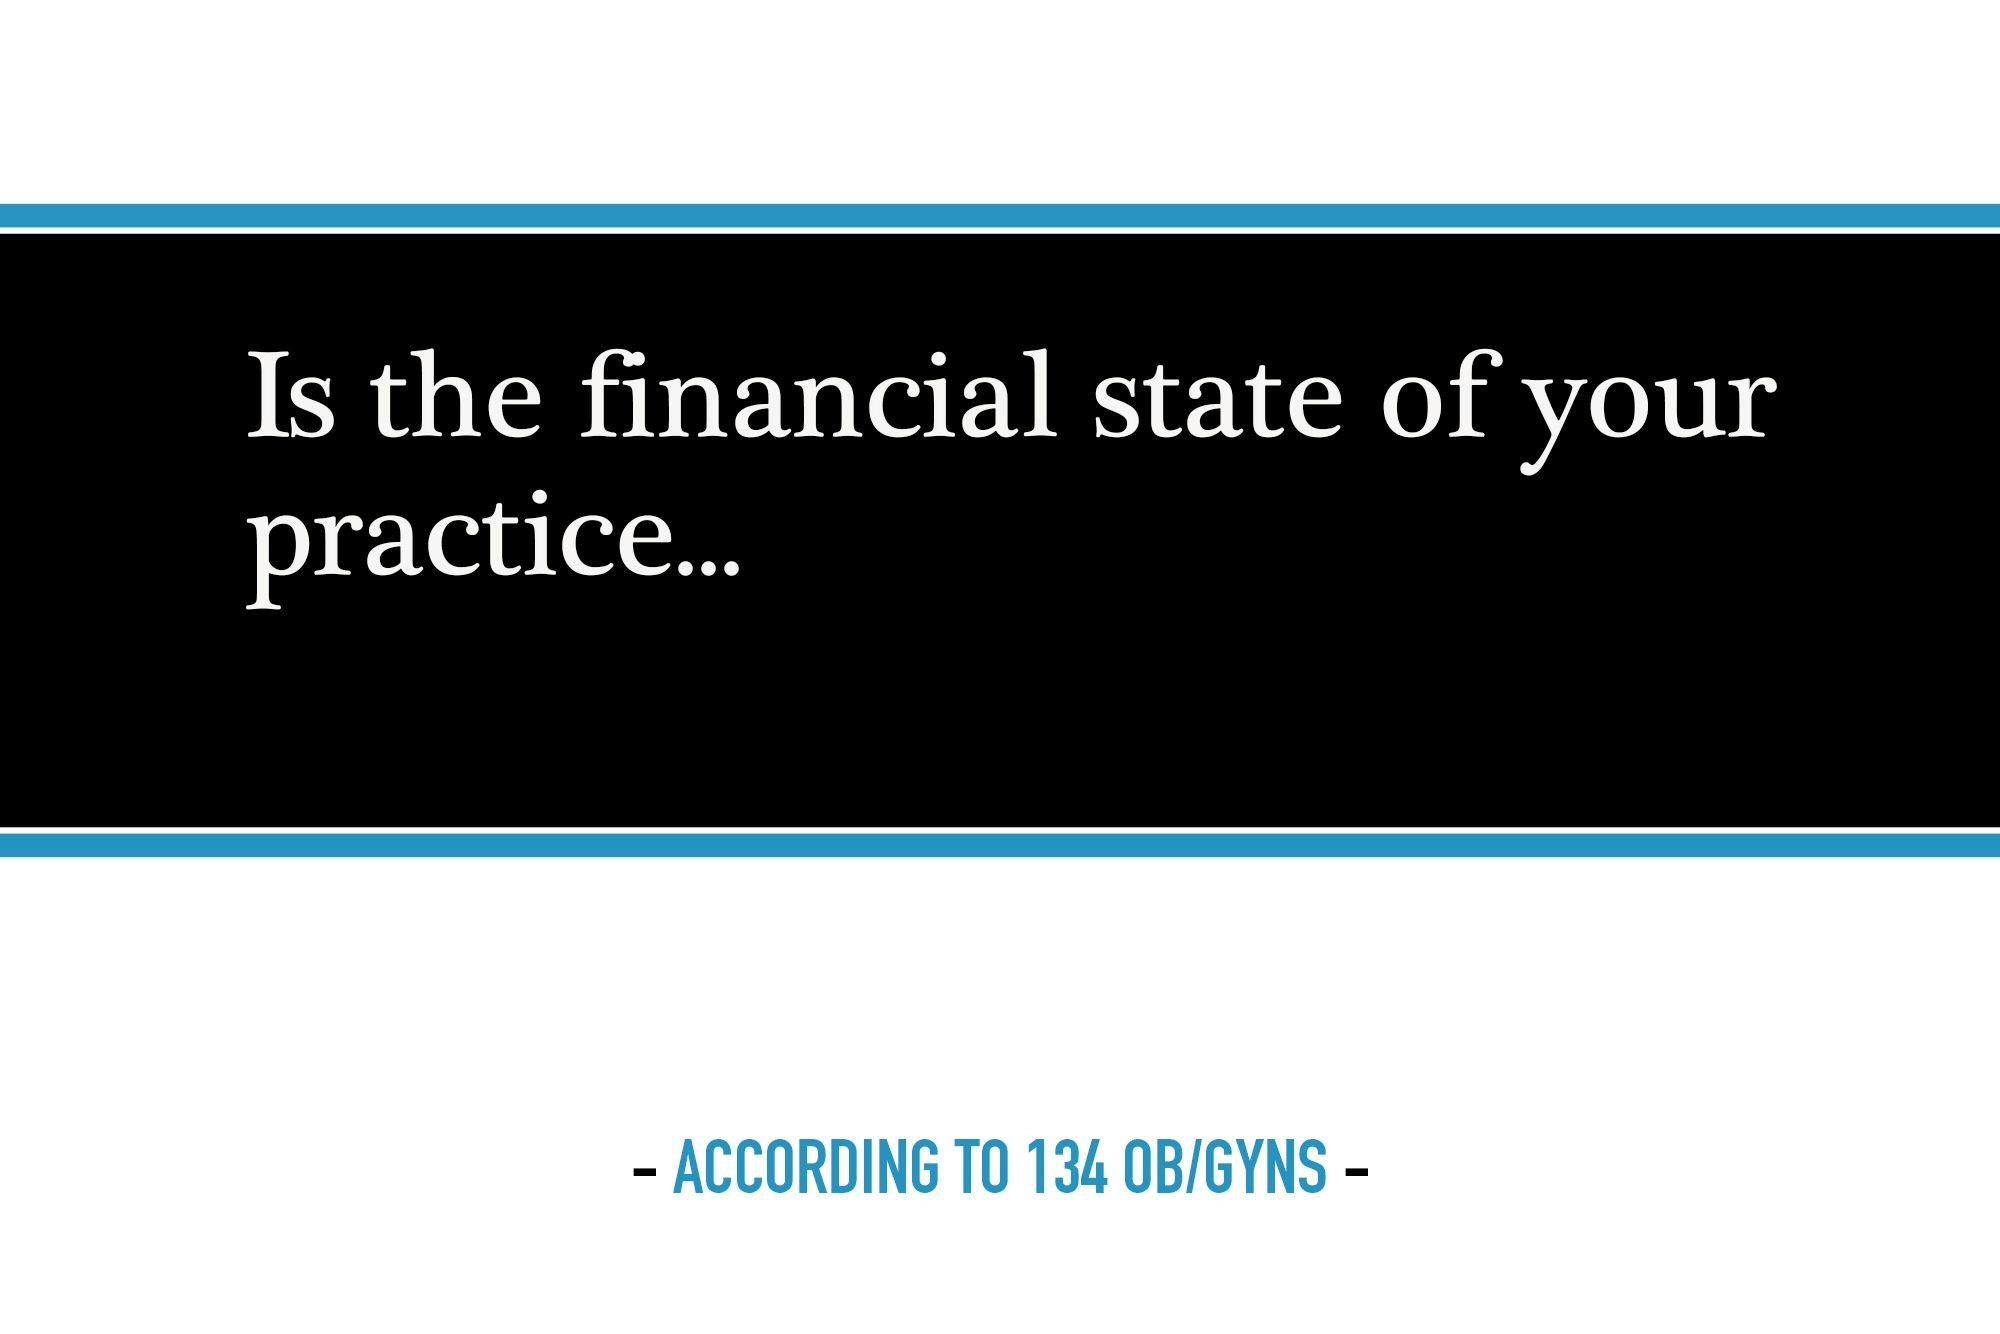 Is the financial state of your practice...